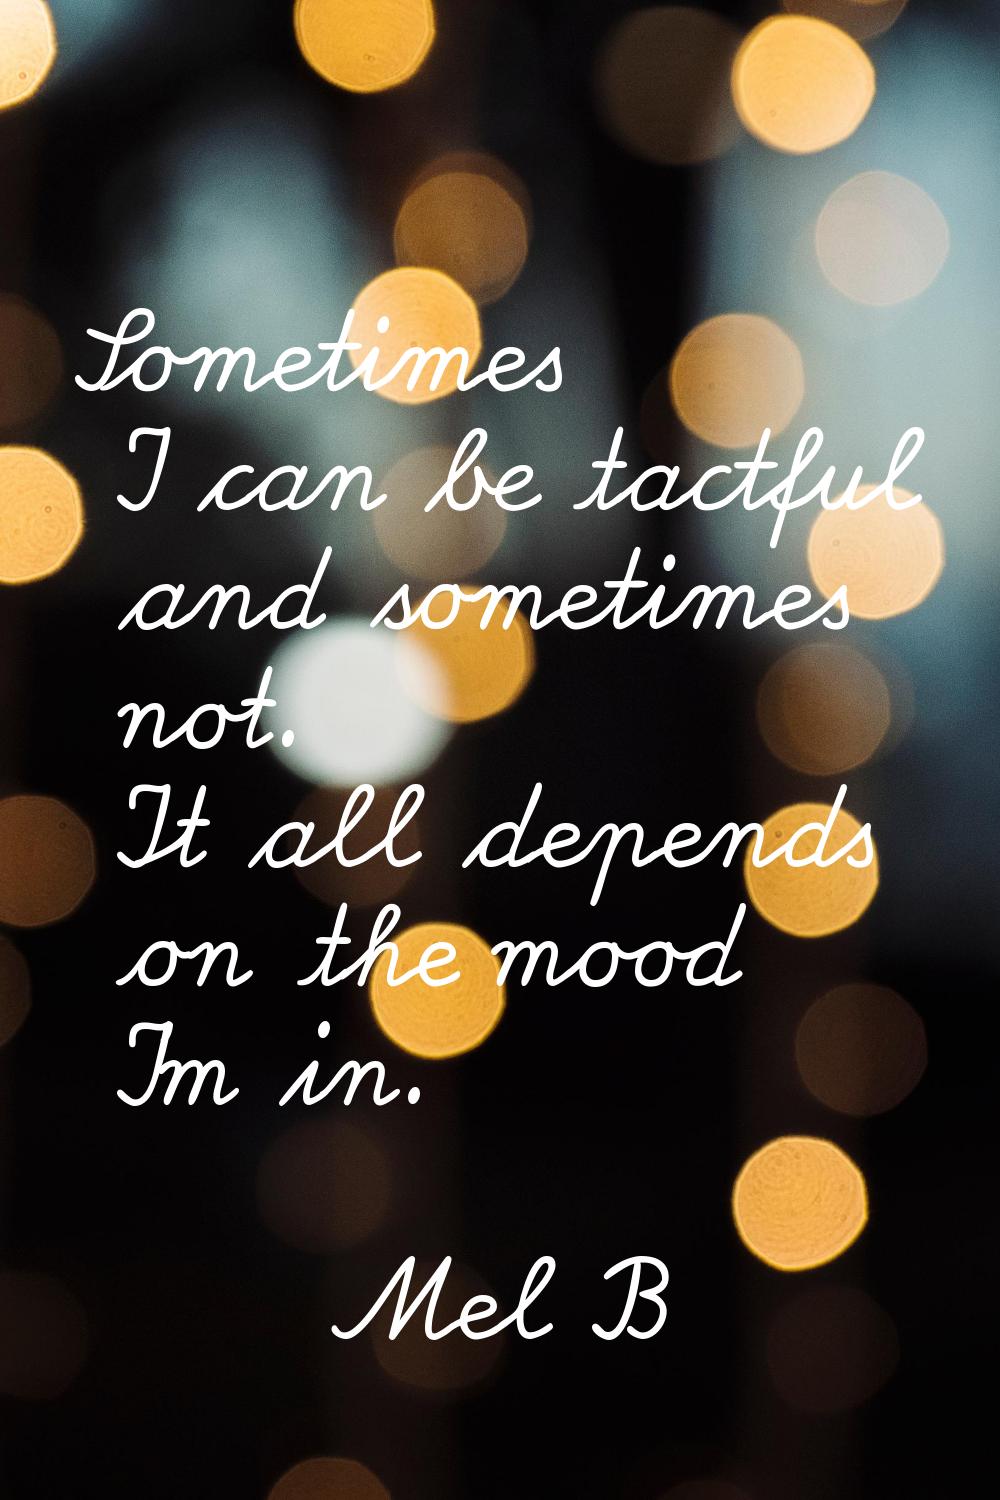 Sometimes I can be tactful and sometimes not. It all depends on the mood I'm in.